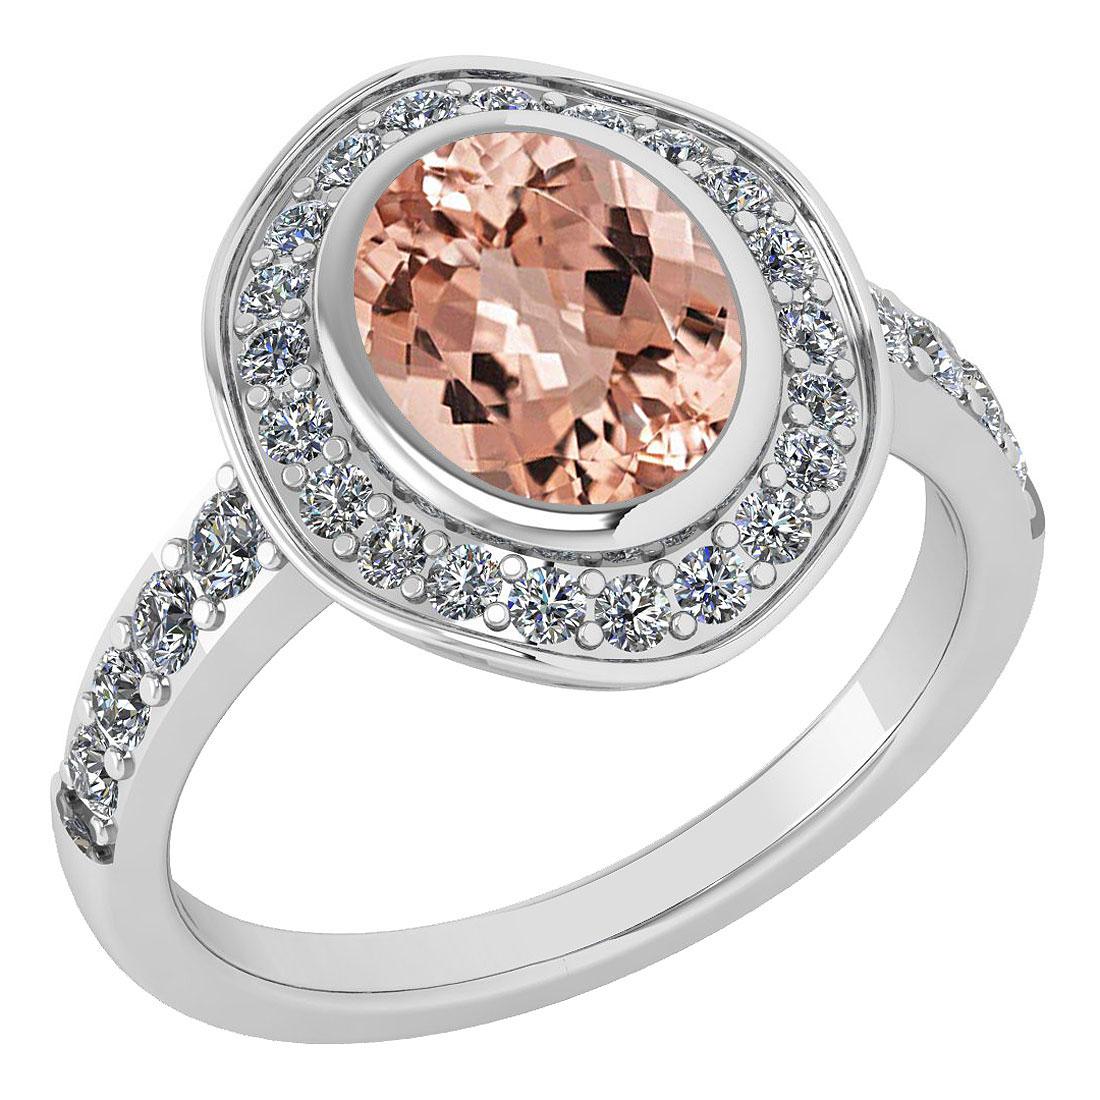 Certified 2.55 Ctw Morganite And Diamond Ladies Fashion Halo Ring 14K White Gold (VS/SI1) MADE IN US